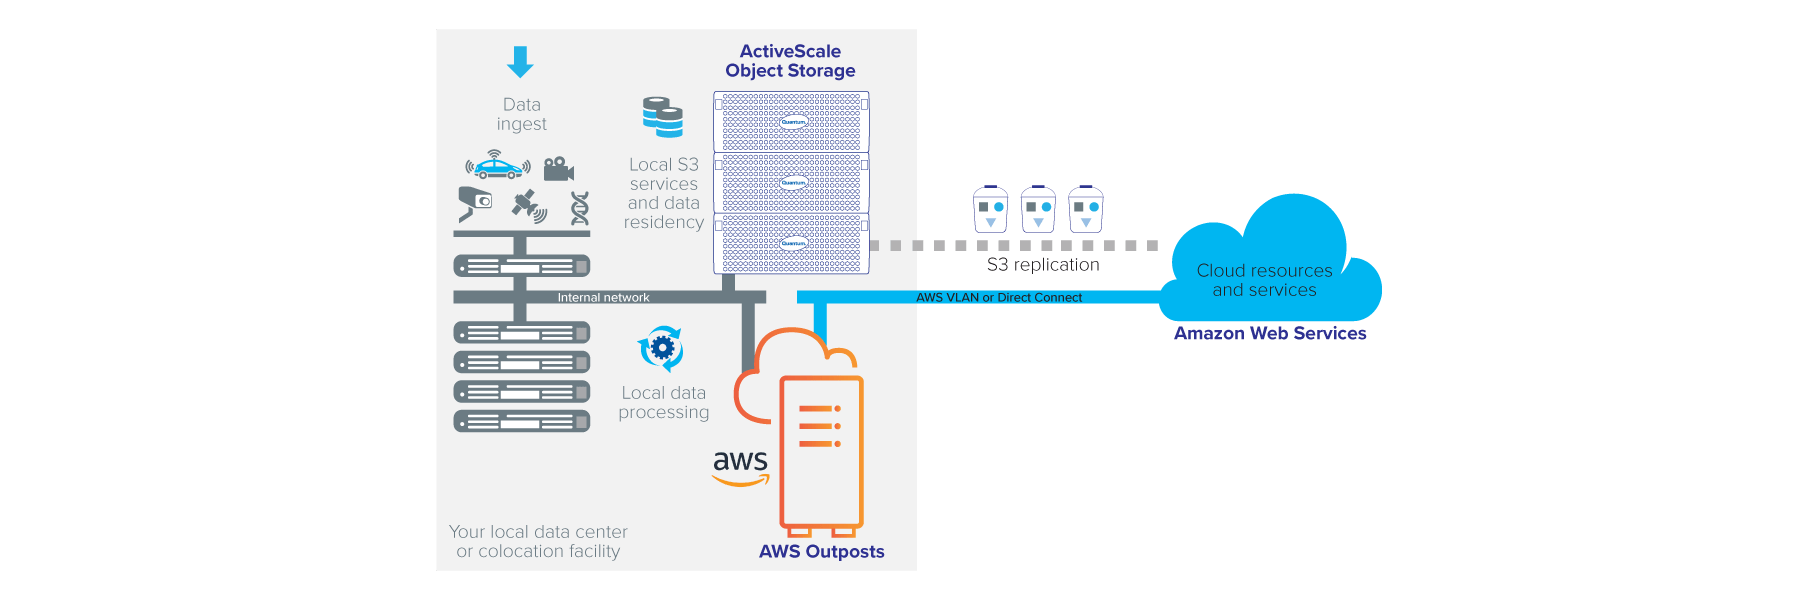 ActiveScale provides S3 services for AWS Outposts in support of latency-sensitive applications